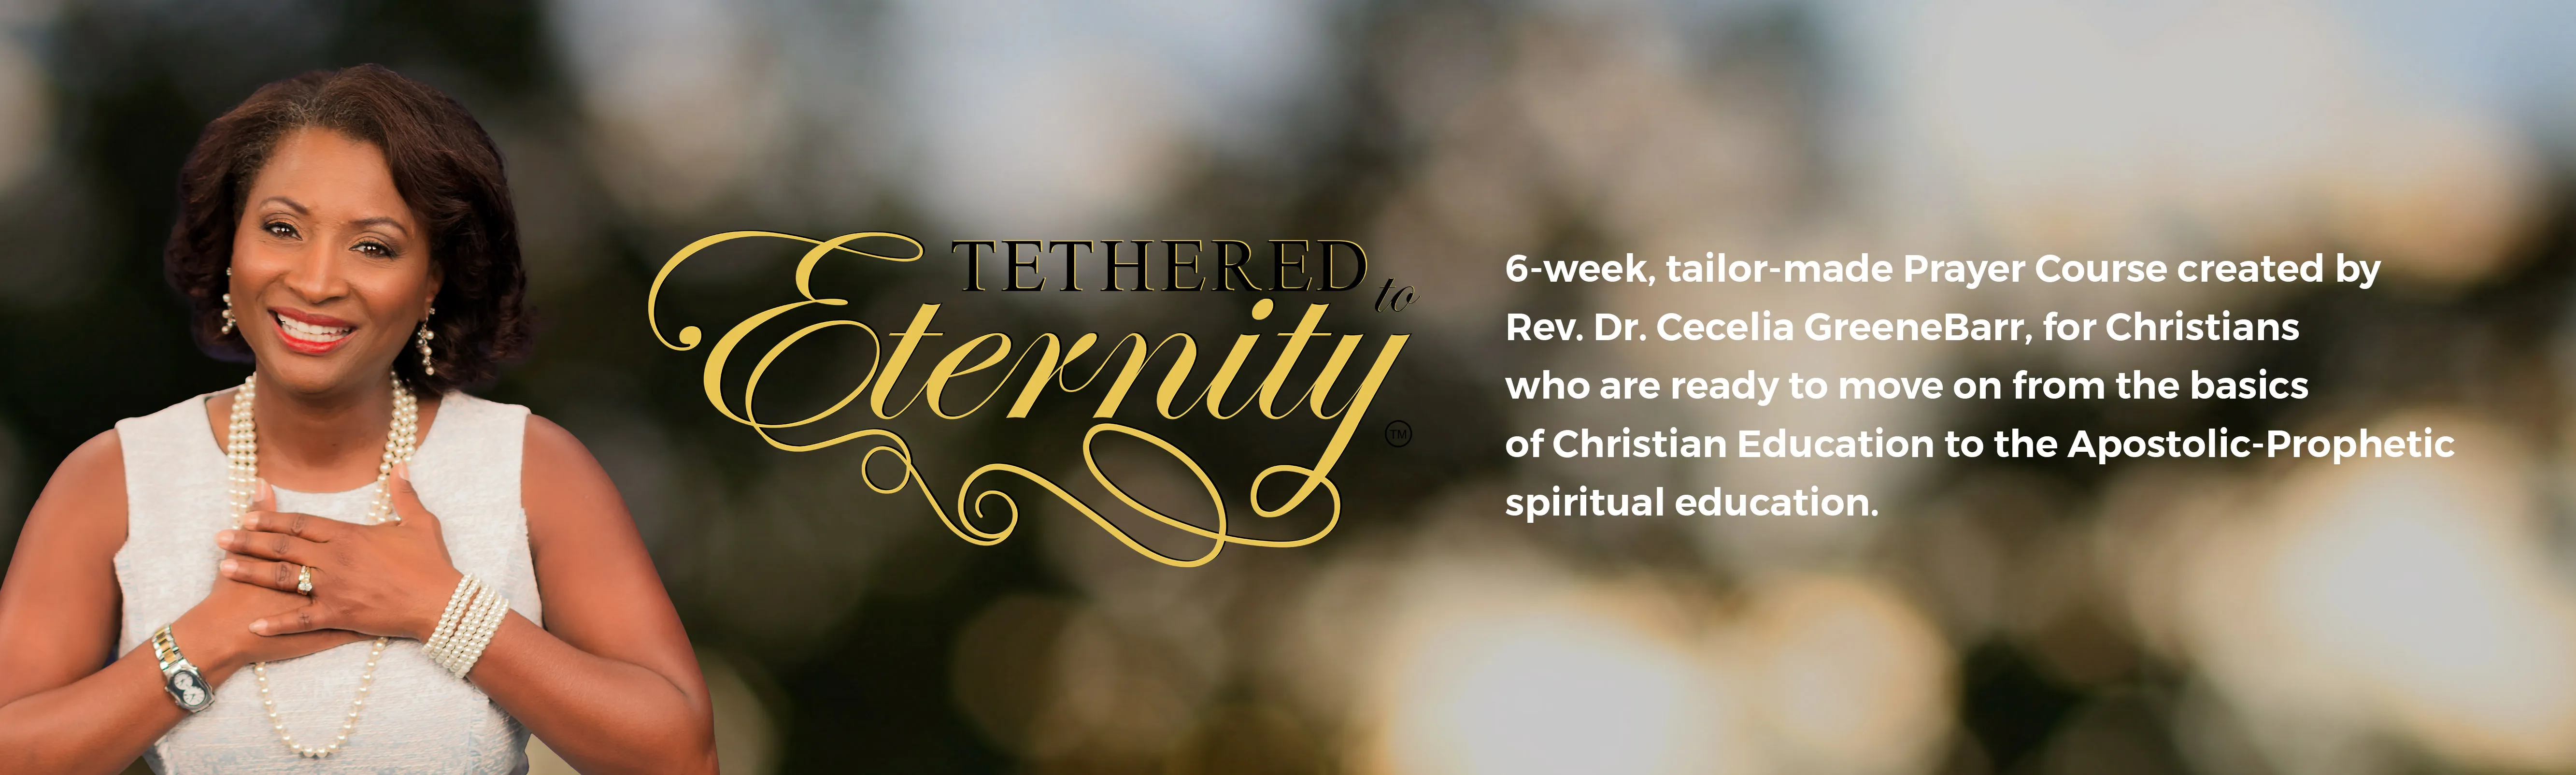 Tethered To Eternity banner